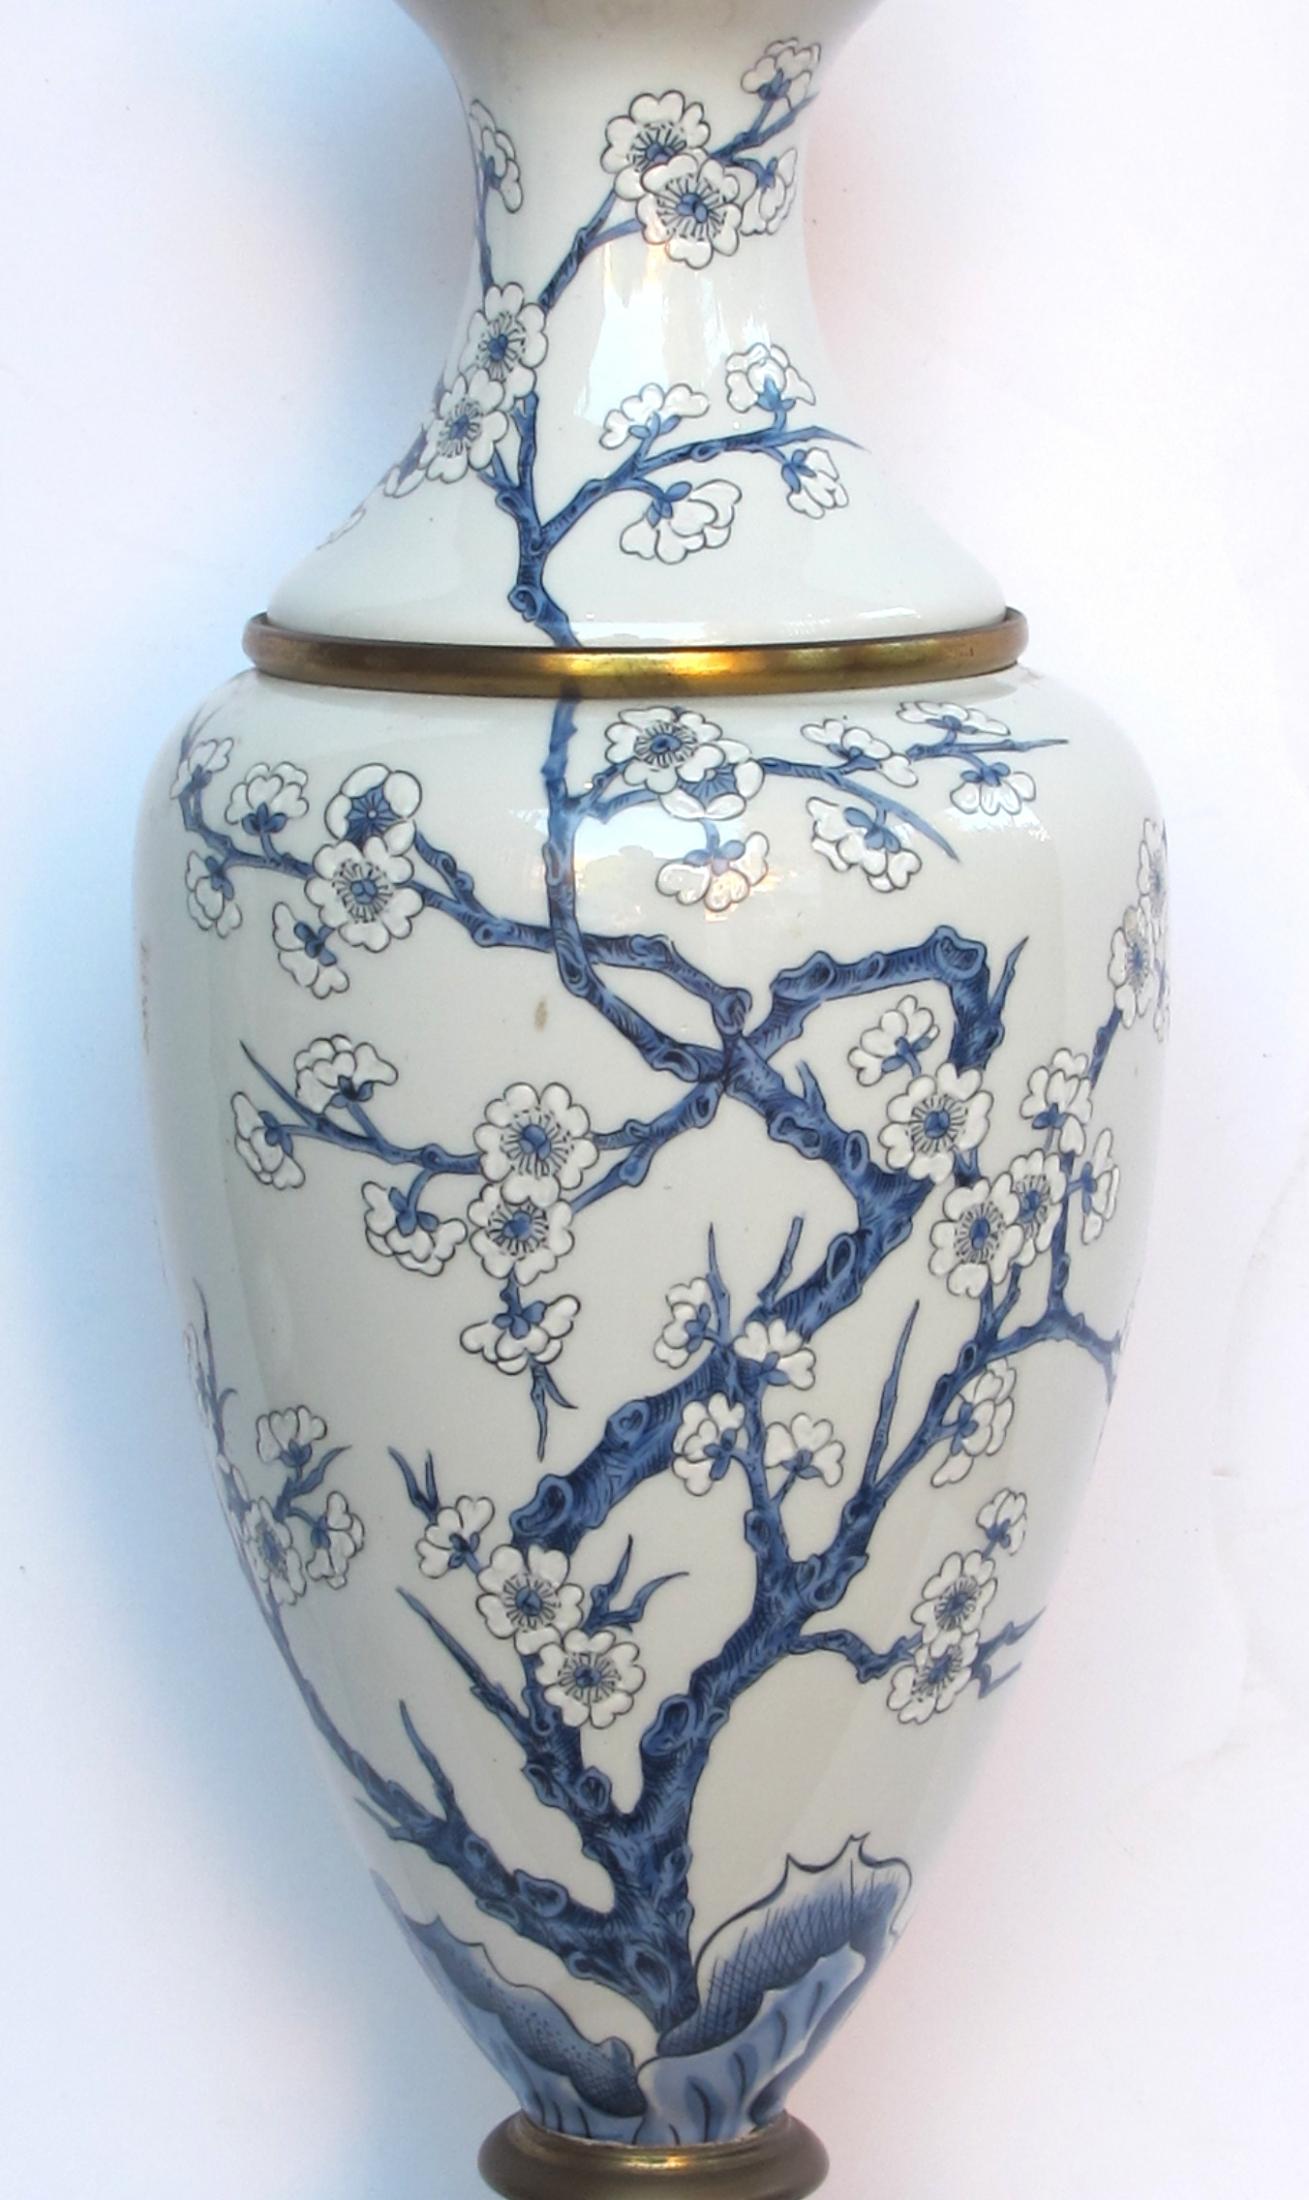 Each lamp decorated with meandering branchwork and cherry blossoms; underside with under-glaze blue stamp 'Porcelaine de Paris, france, fondee en 1773'.